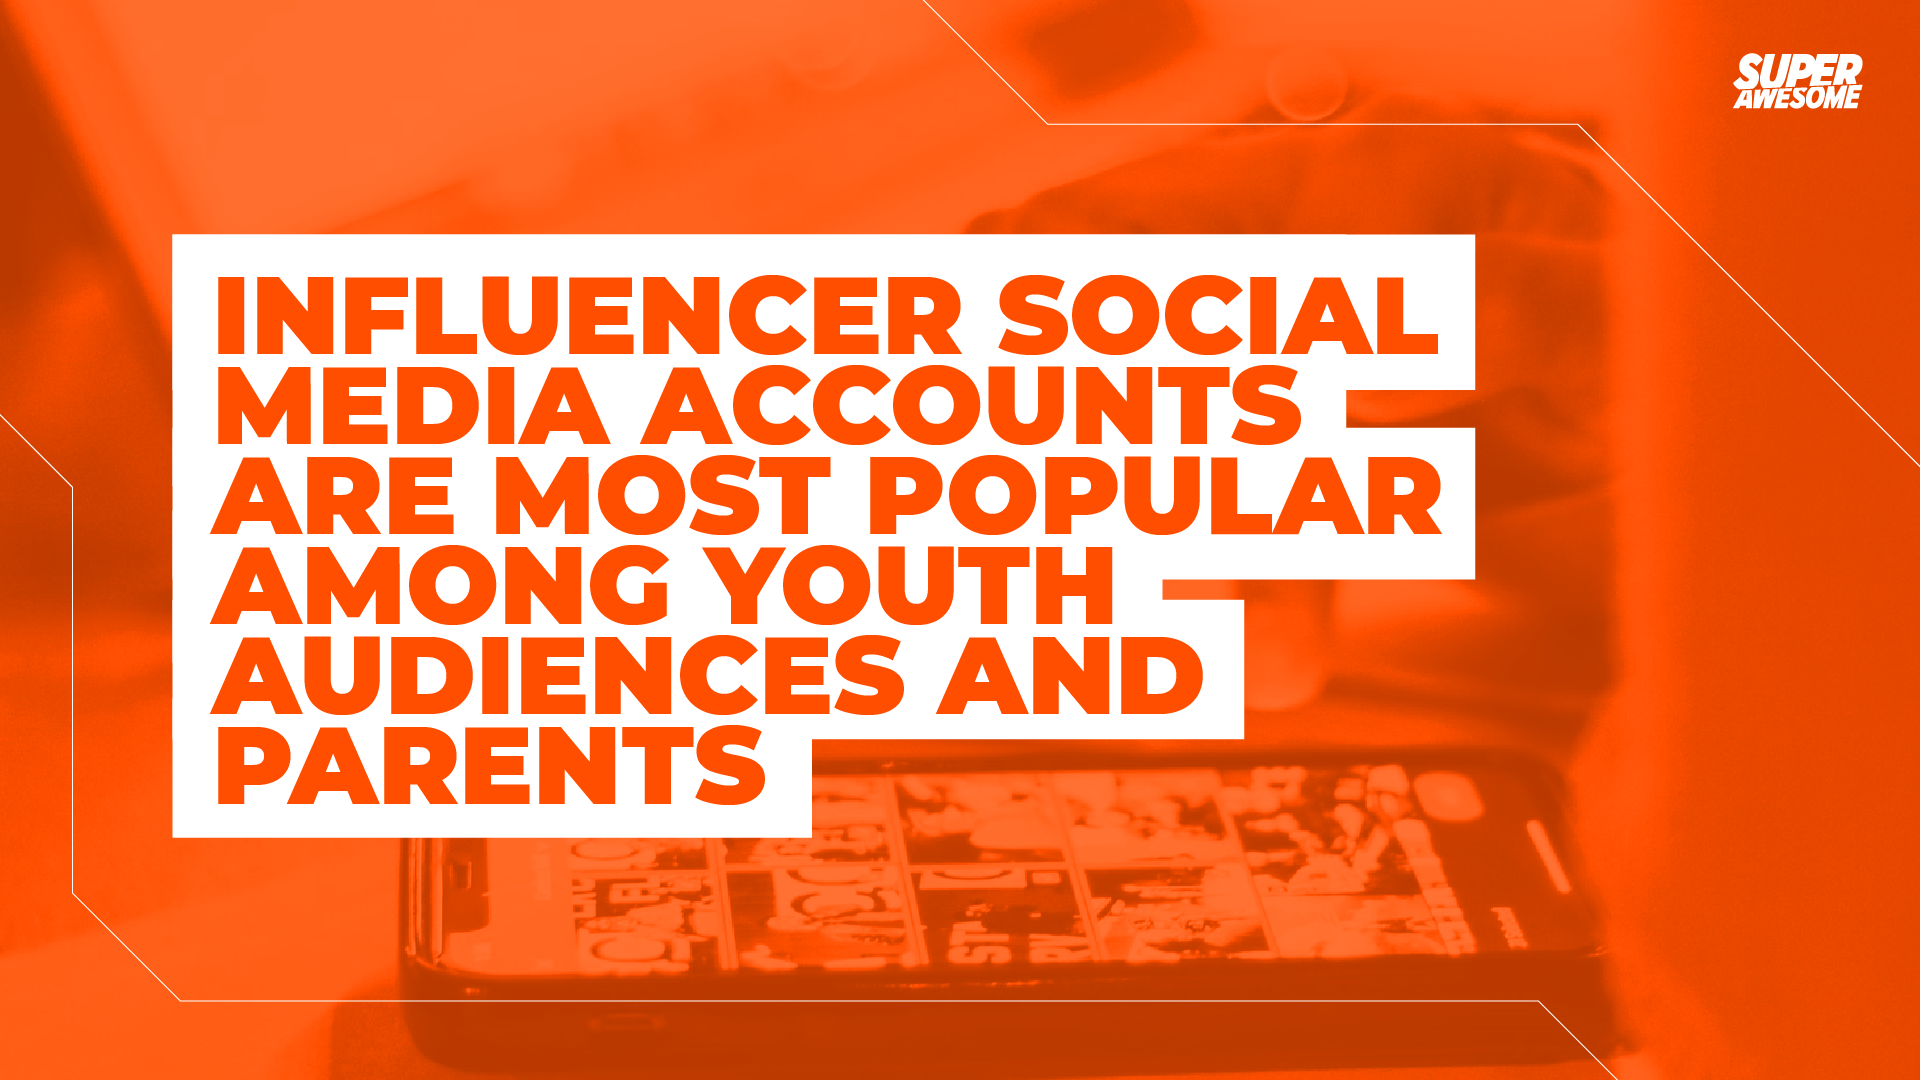 Influencer social media accounts are most popular among youth audiences and parents